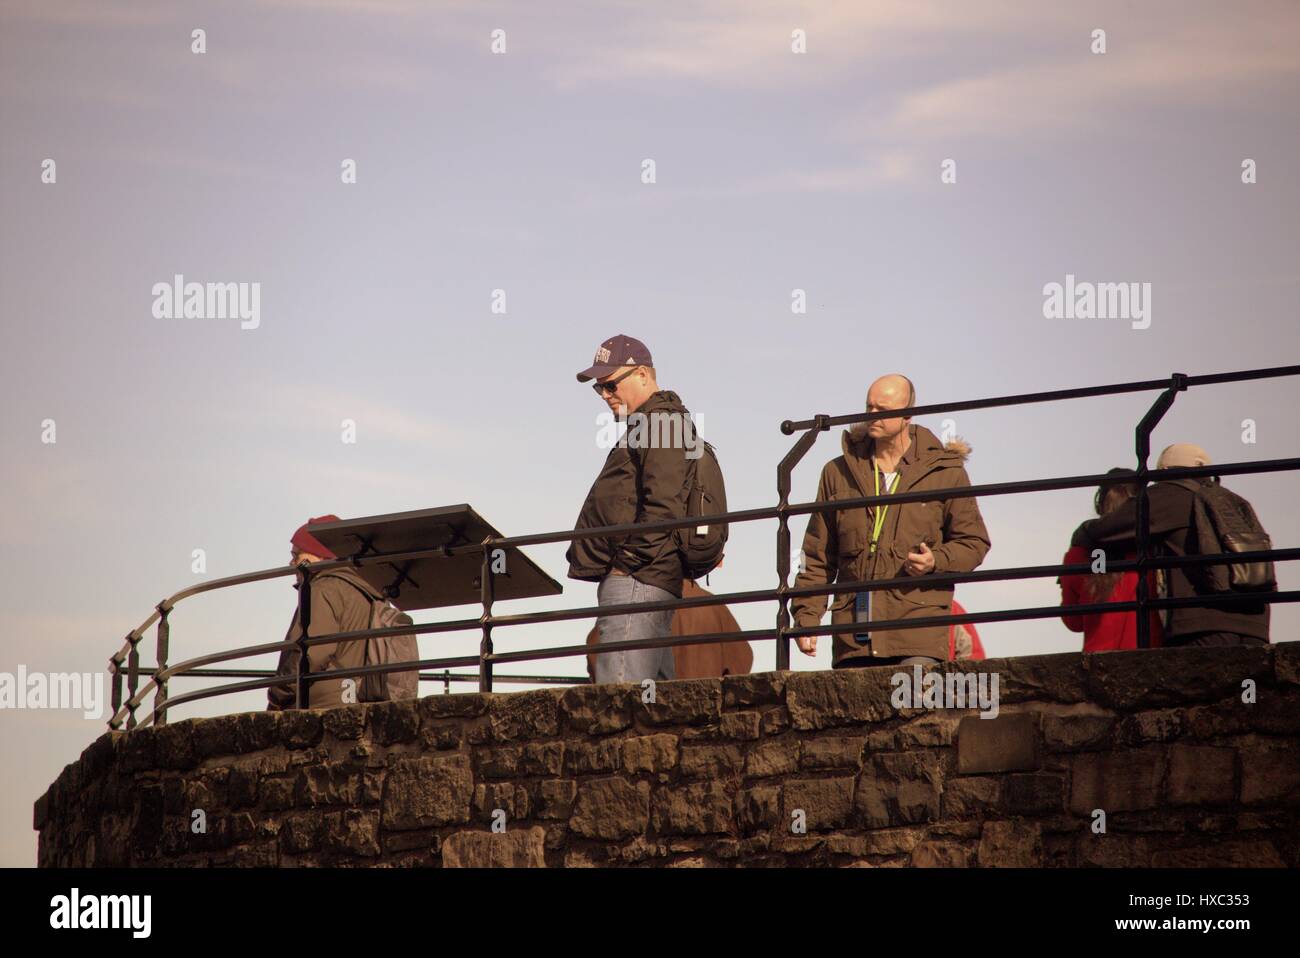 Edinburgh Castle tourist crowds on a sunny day explore the inside of the walls Stock Photo